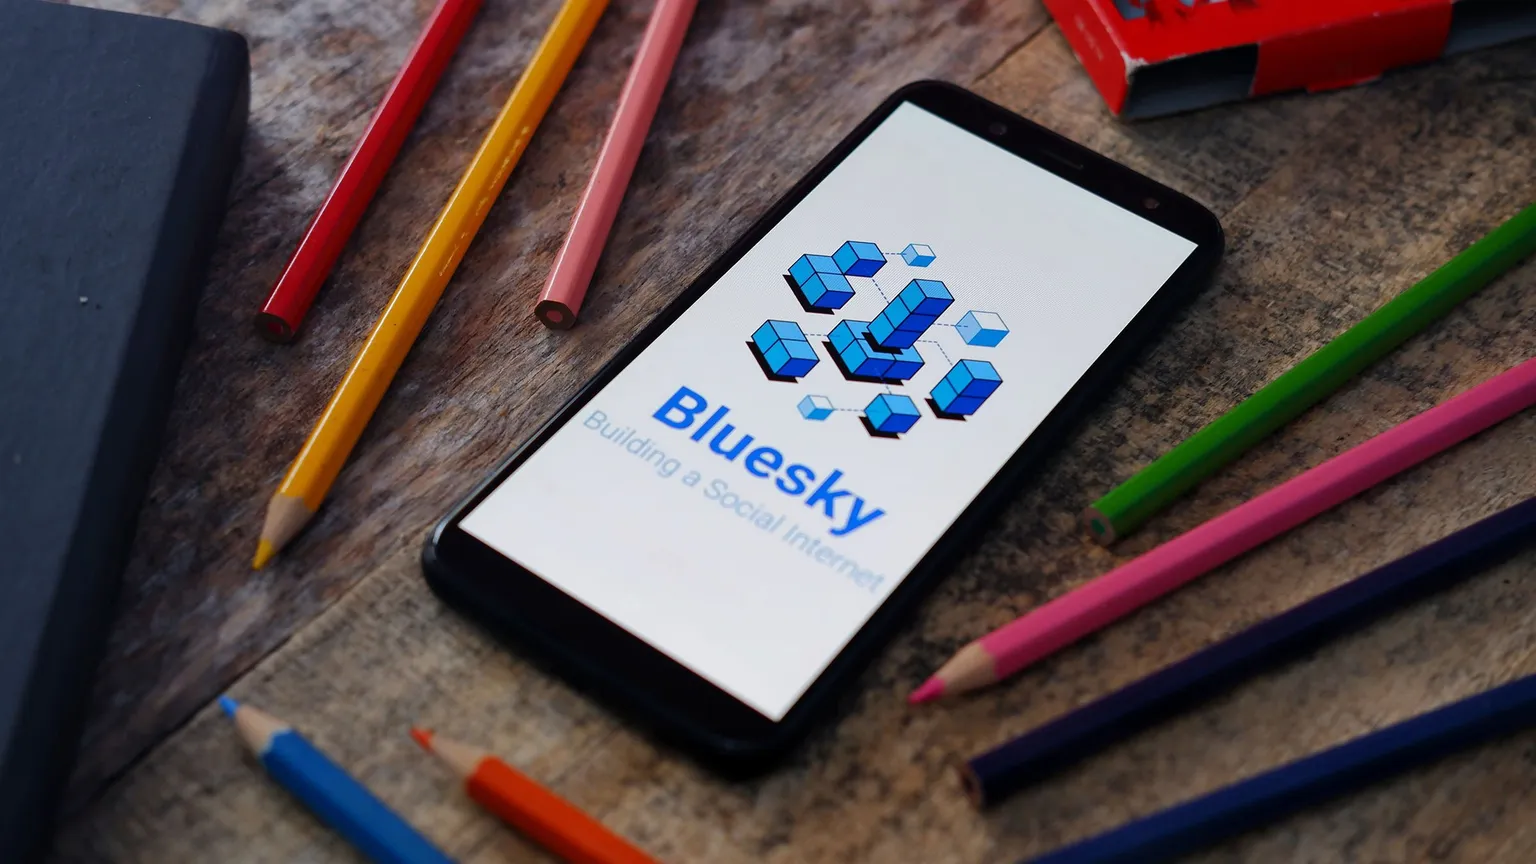 Bluesky is a new social media founded by former Twitter founder and CEO Jack Dorsey. Image: Shutterstock